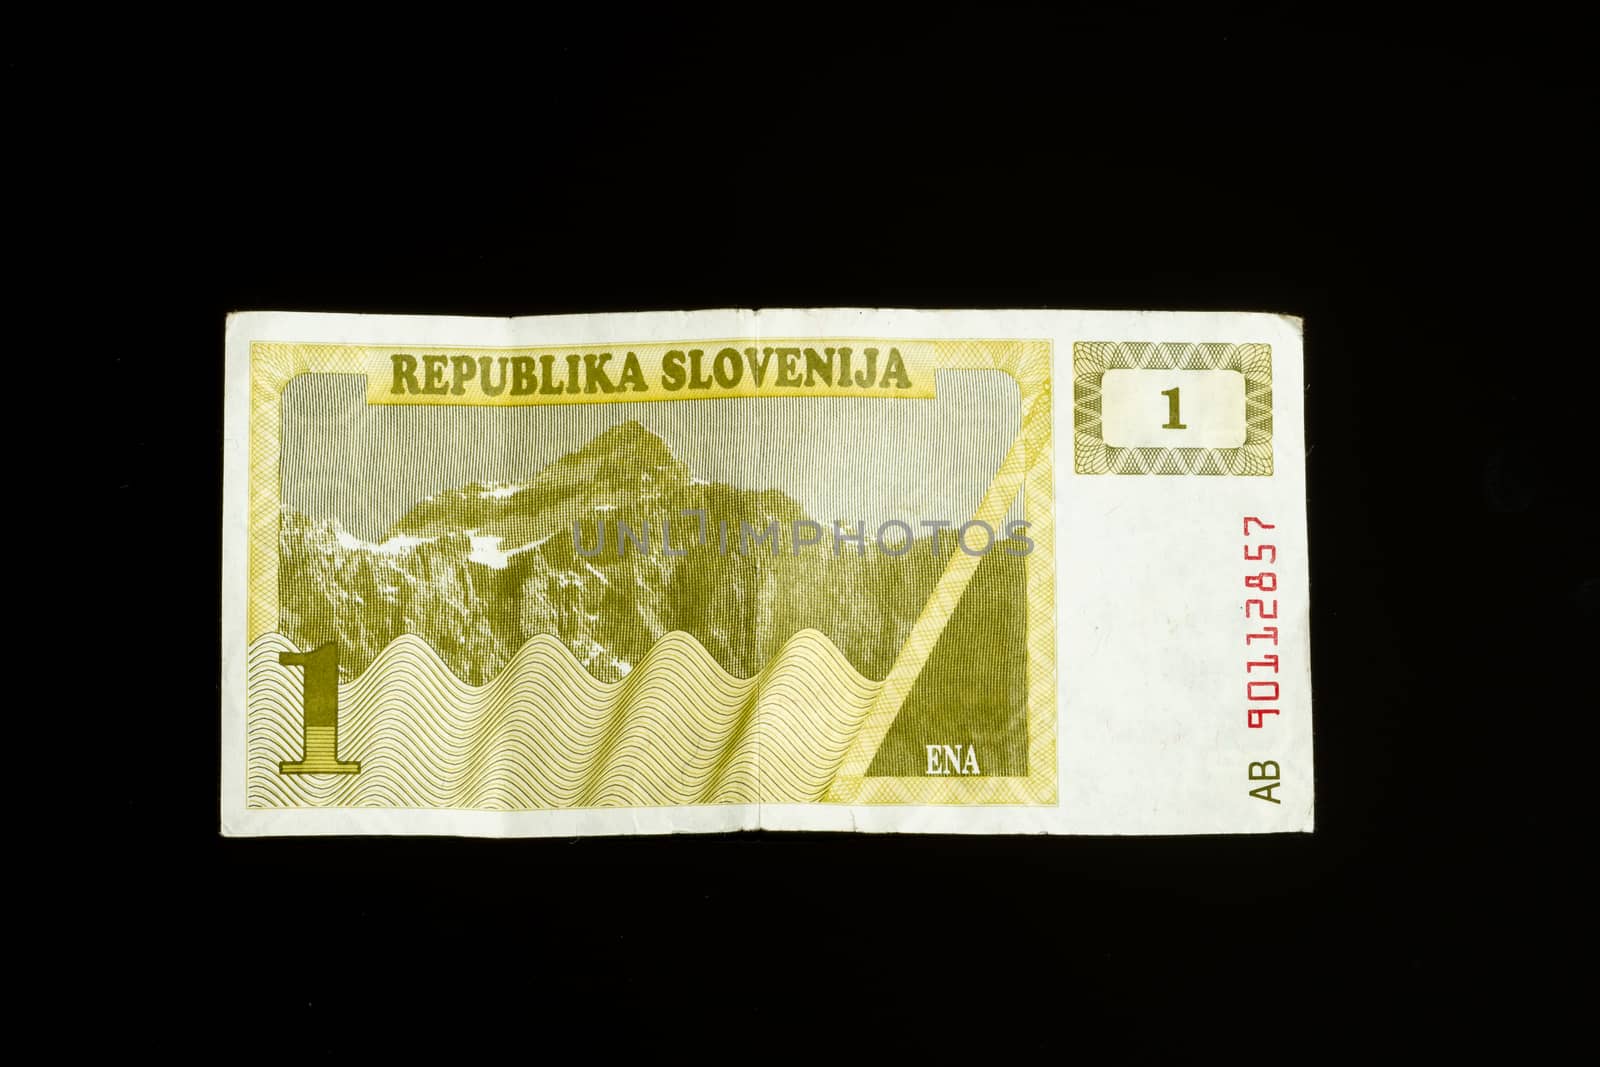 One 1 tolar bill of Slovenia, first paper bank note introduced after declaring independance, isolated on black